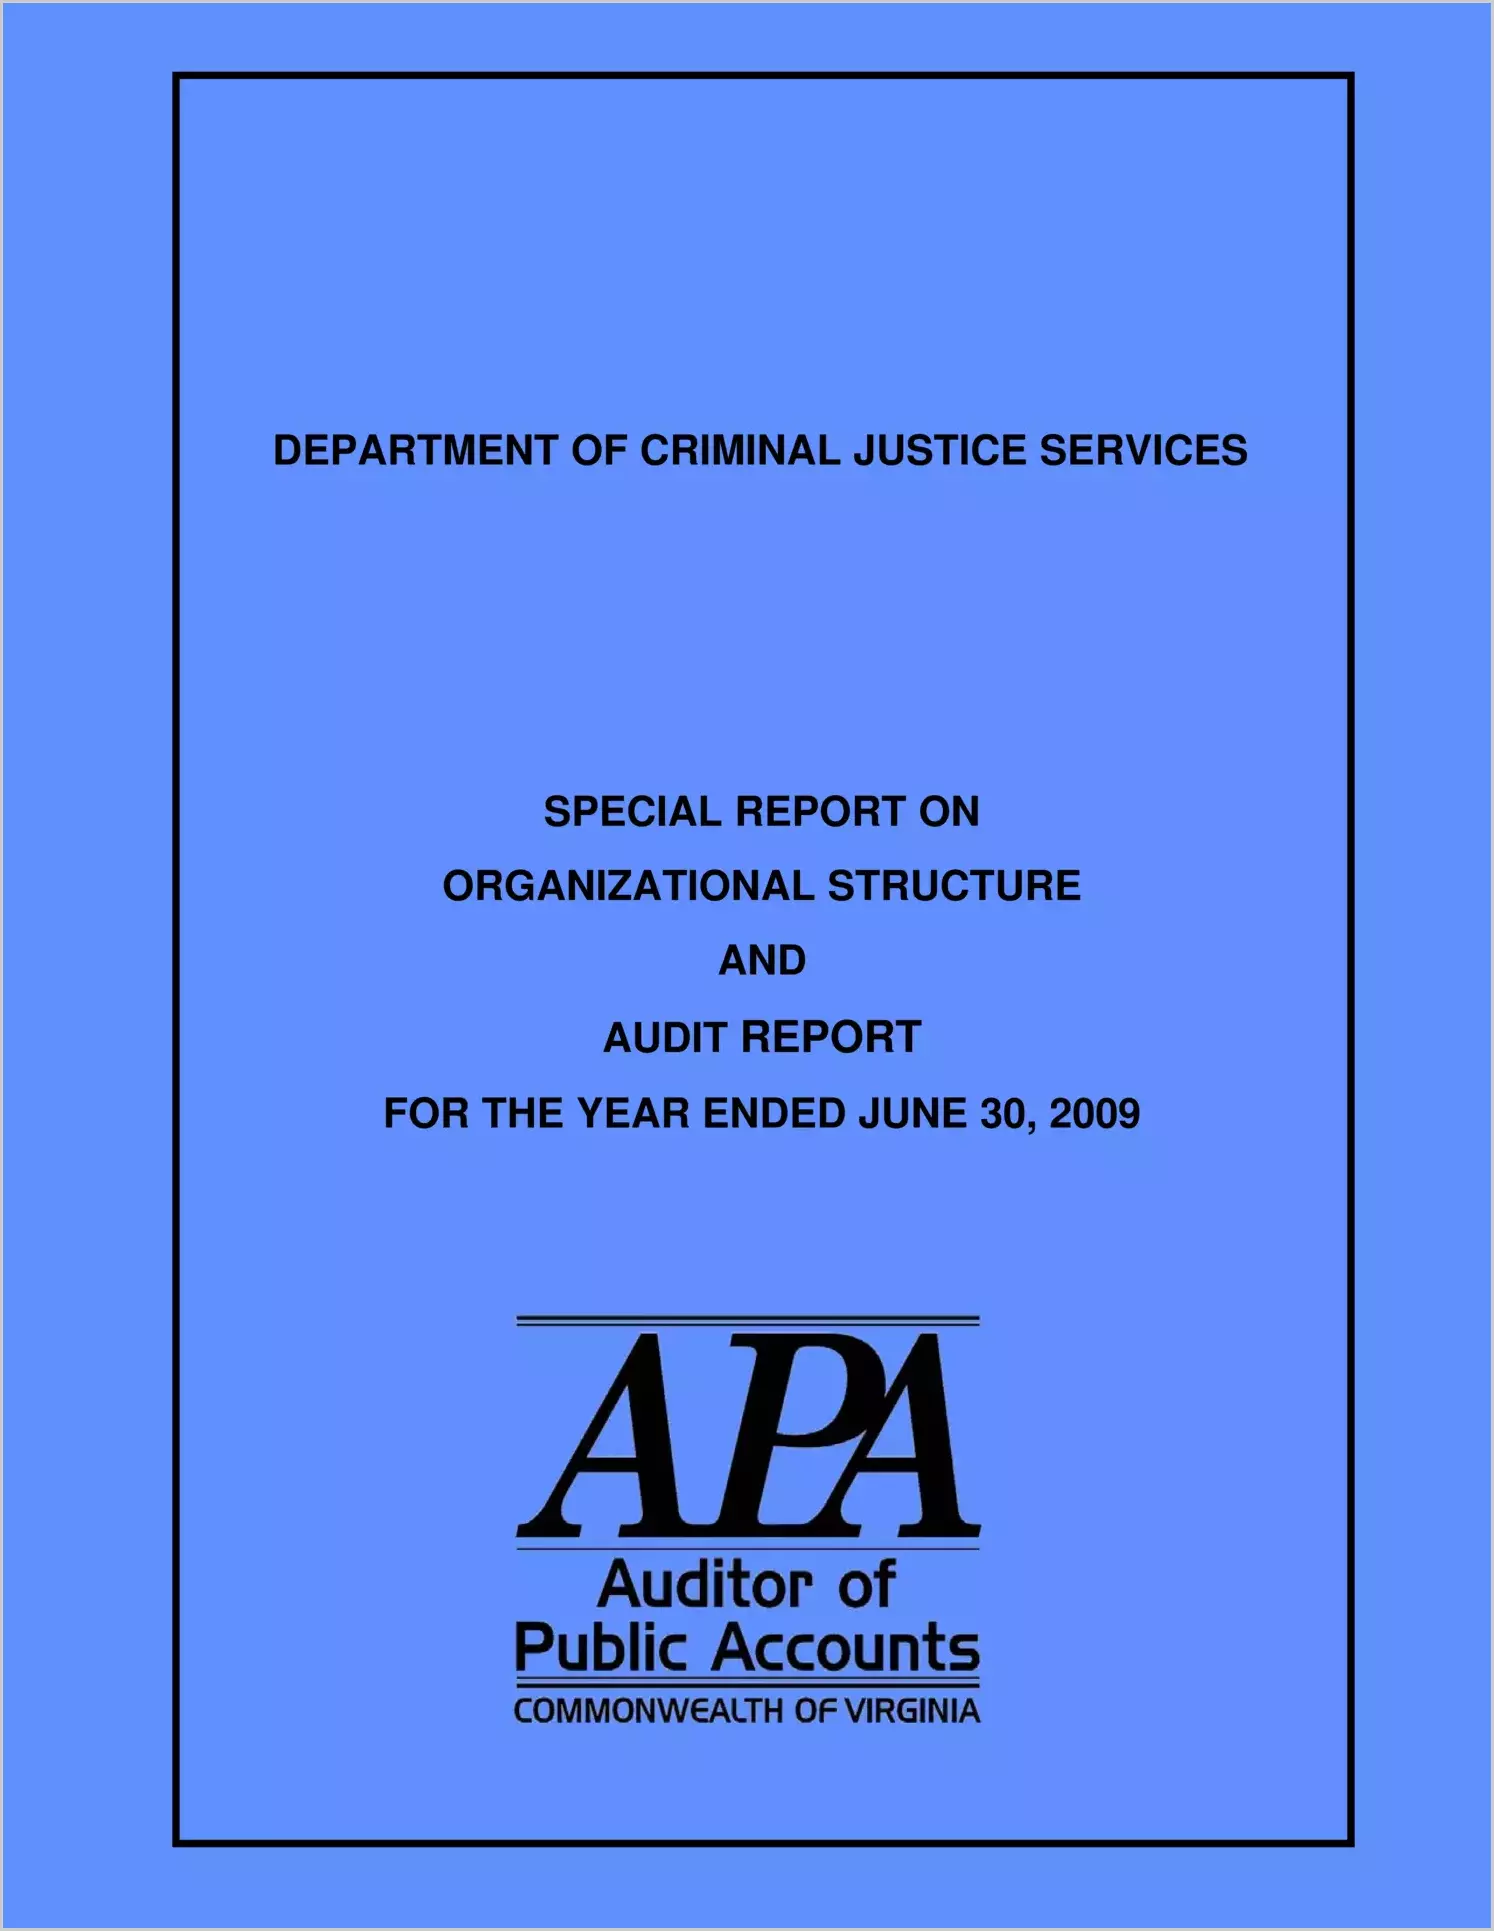 Department of Criminal Justice Services - Special Report On Organizational Structure And Audit Report for the year ended June 30, 2009